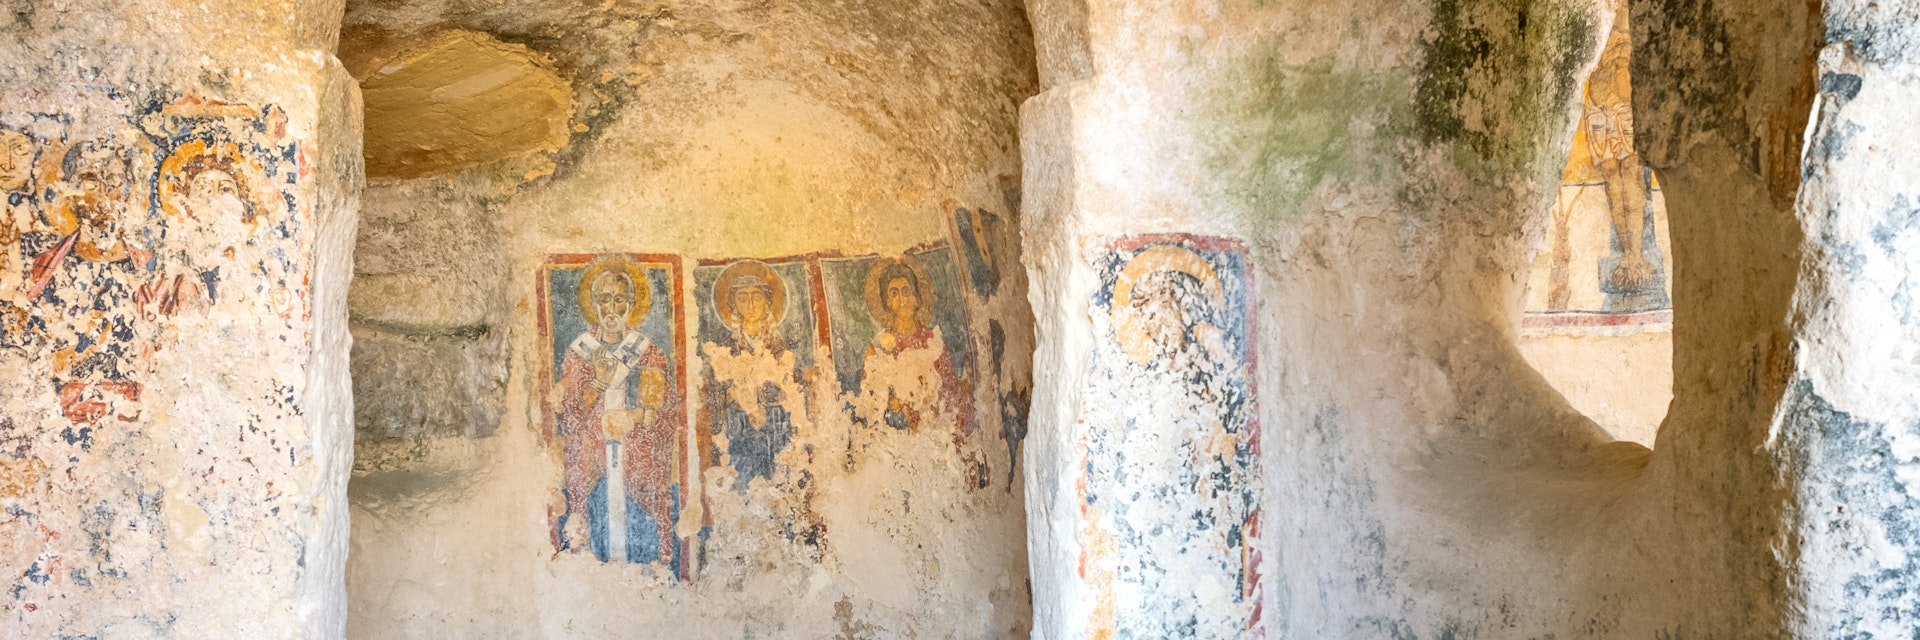 The ancient frescoes of the Madonna Delle Virtu rocky church.